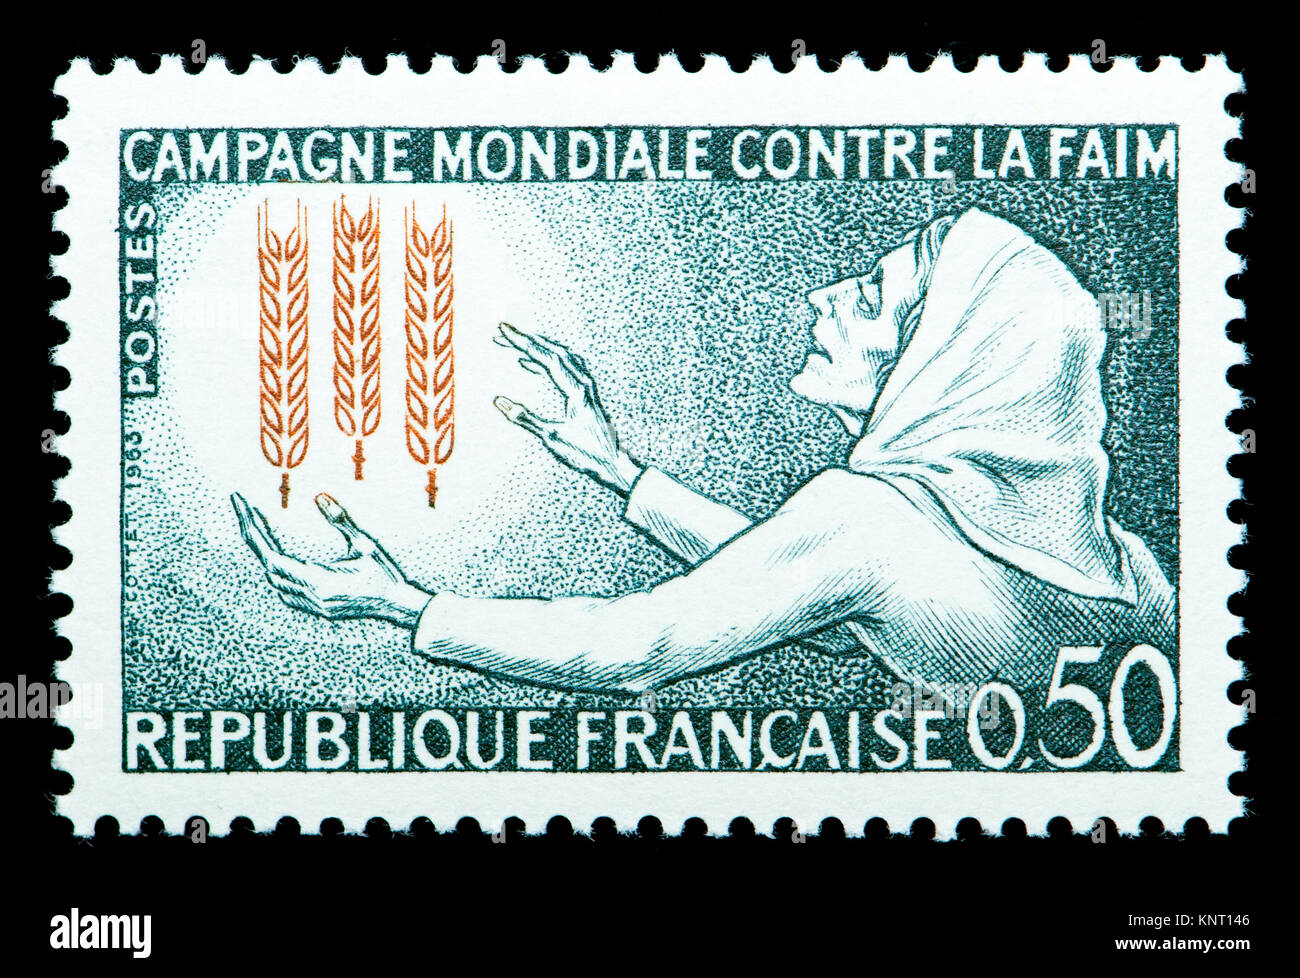 French postage stamp (1963) : Global Campaign against Hunger / Campagne Mondiale Contre la Faim Stock Photo